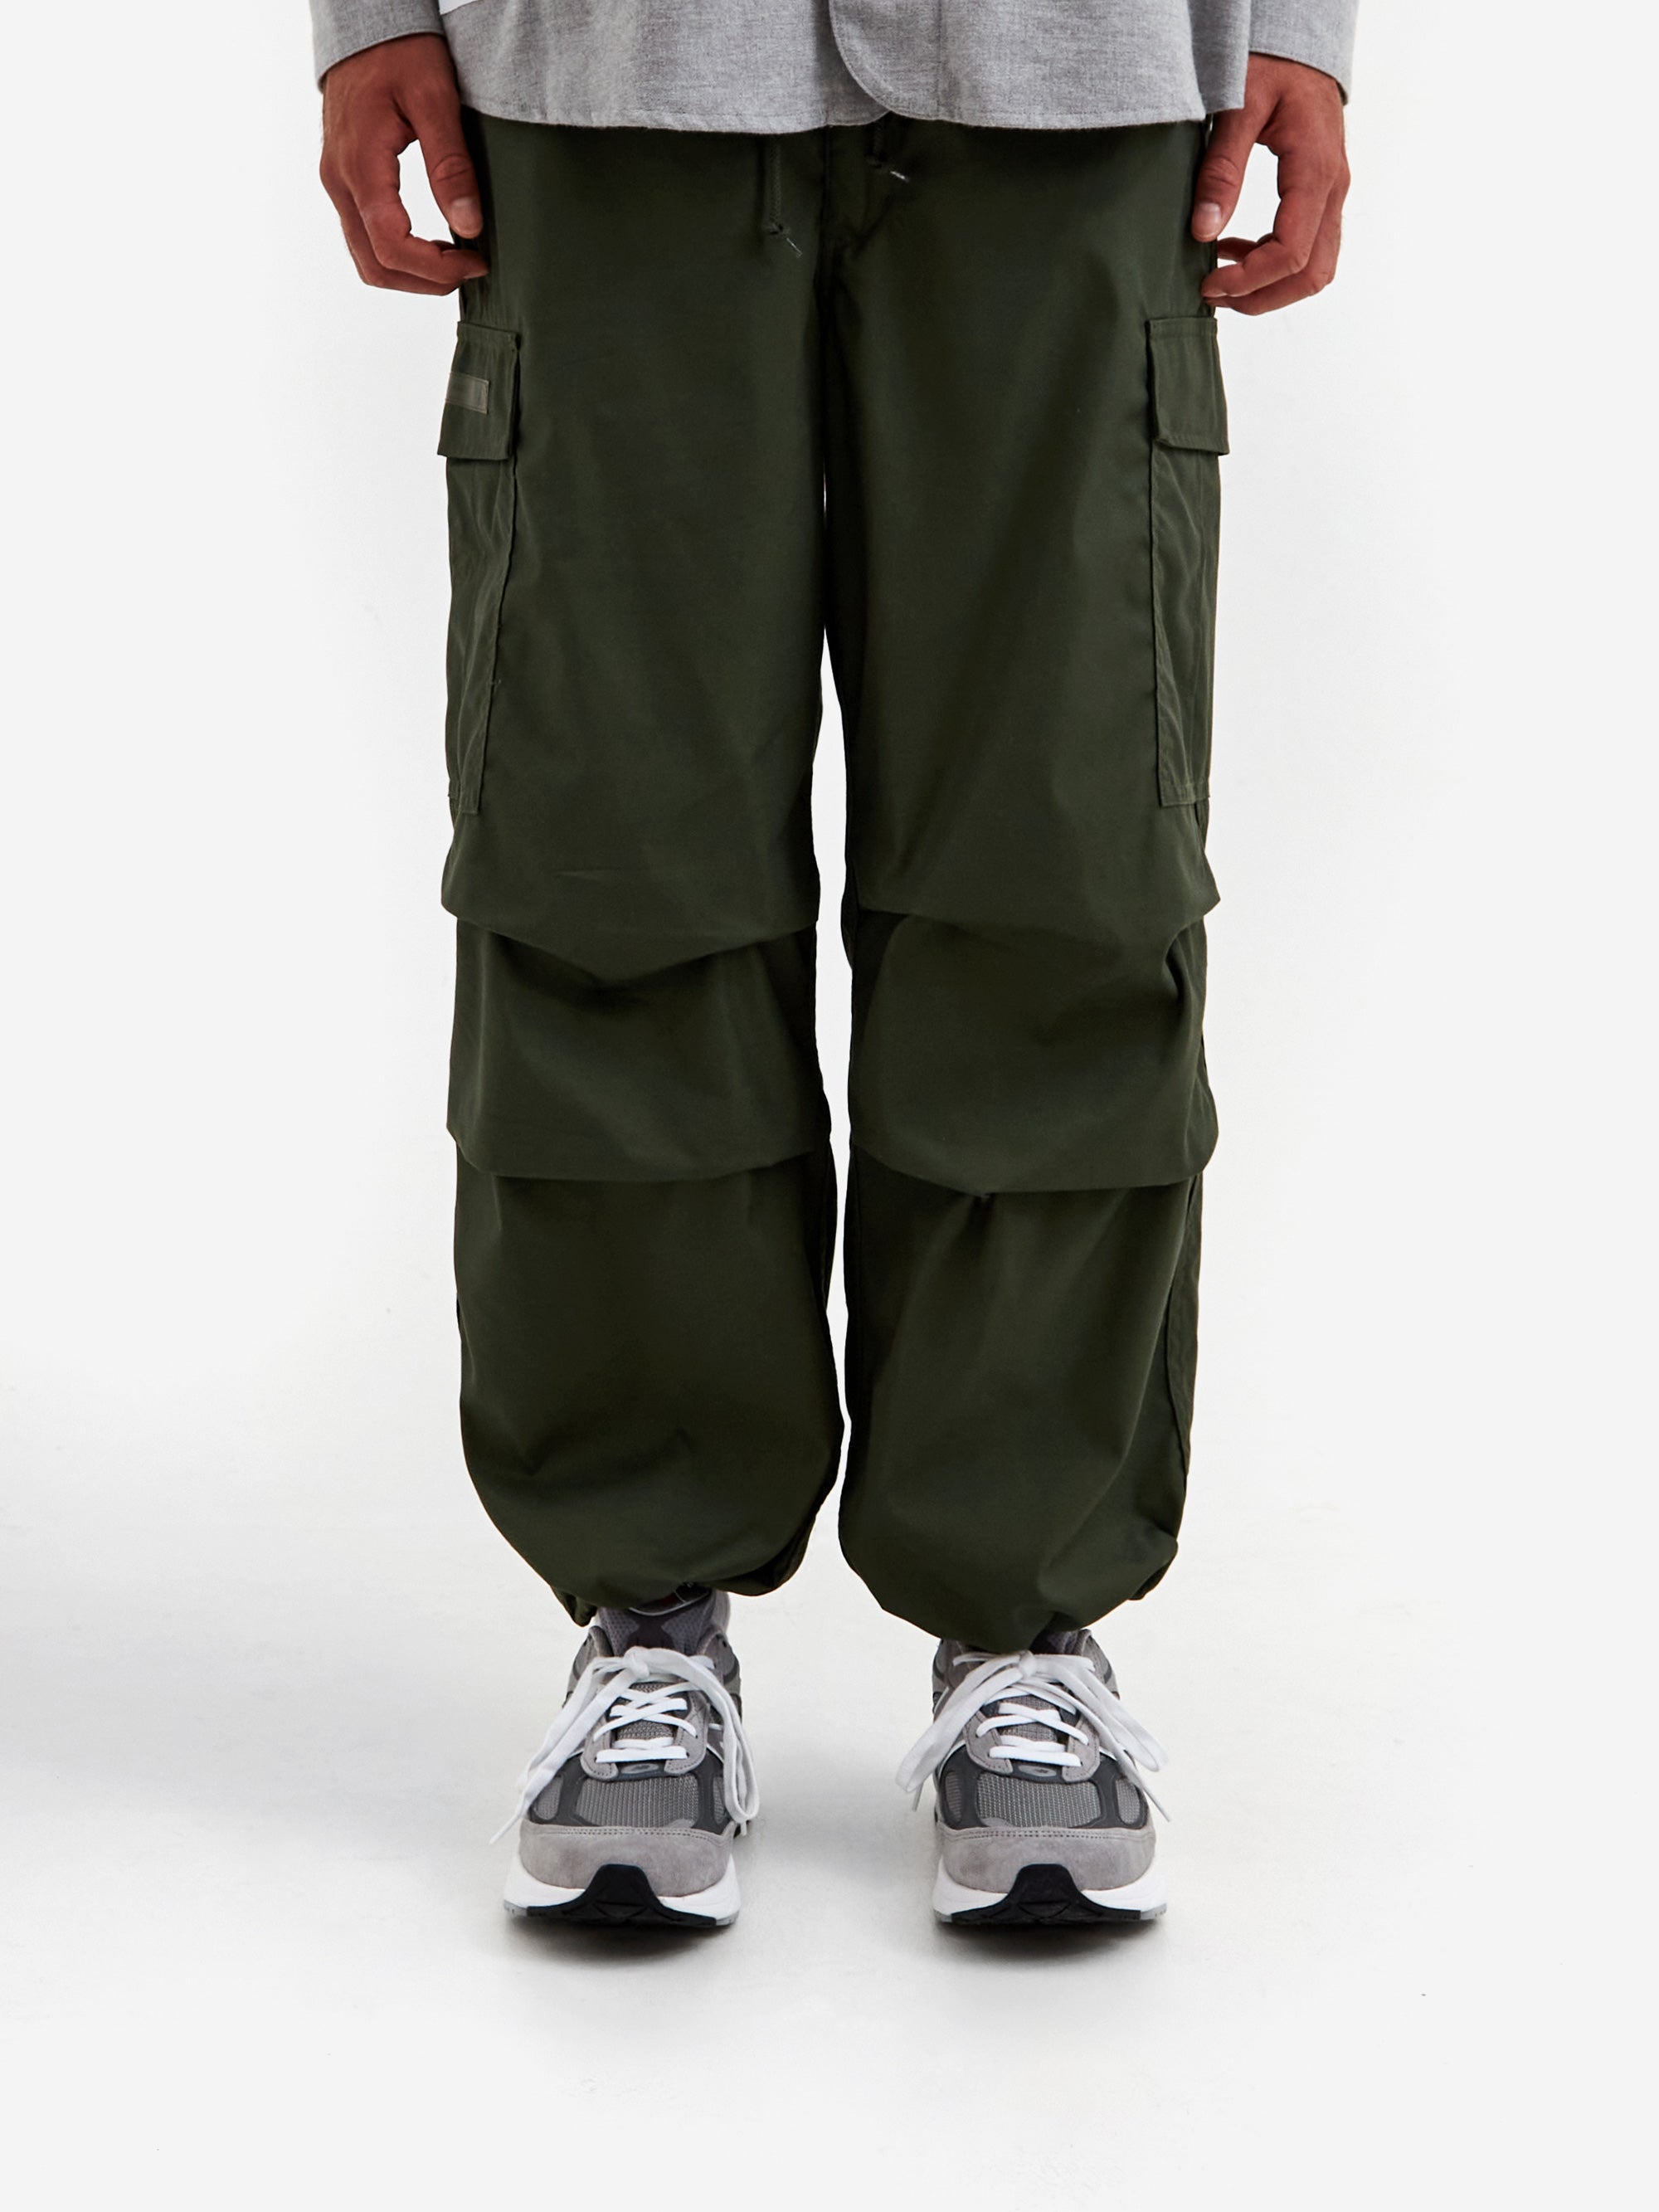 WTAPS MILT0001 / Trousers 14 / NYCO. Oxford - Olive Drab